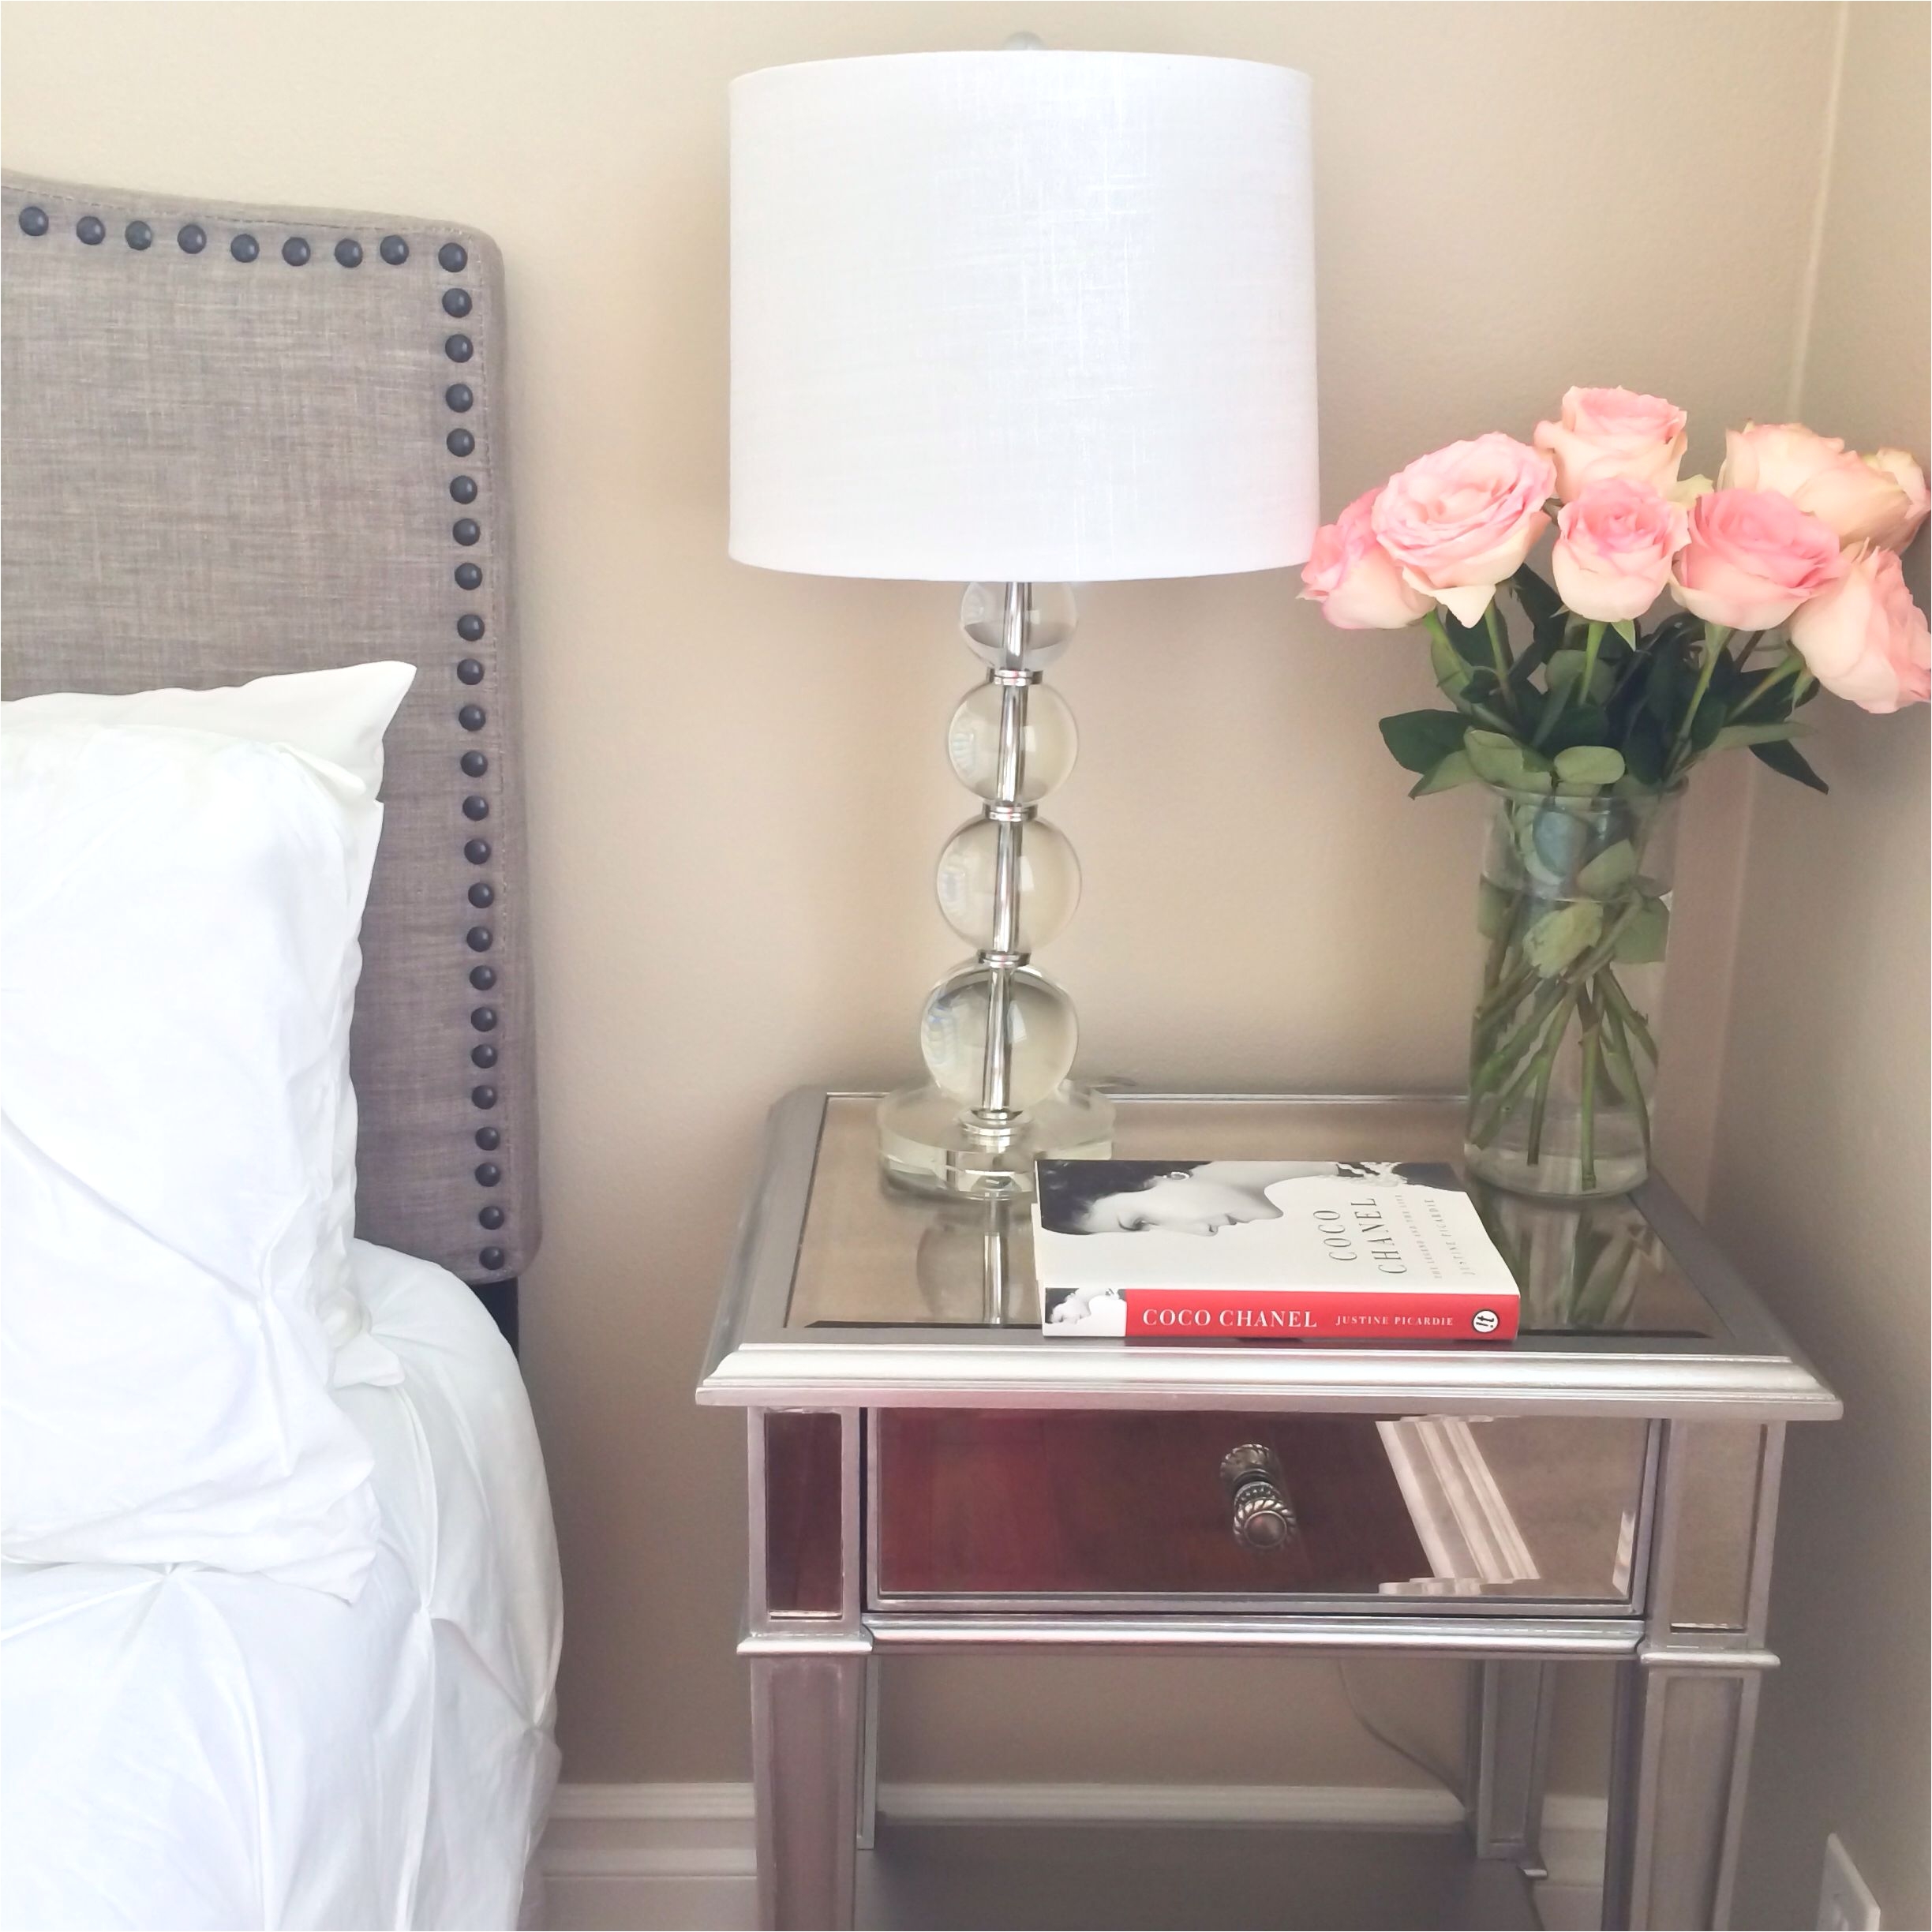 guest bedroom grey headboard with stud detail edging white tufted comforter set glass lamp mirrored nightstand and pink roses could still be good for